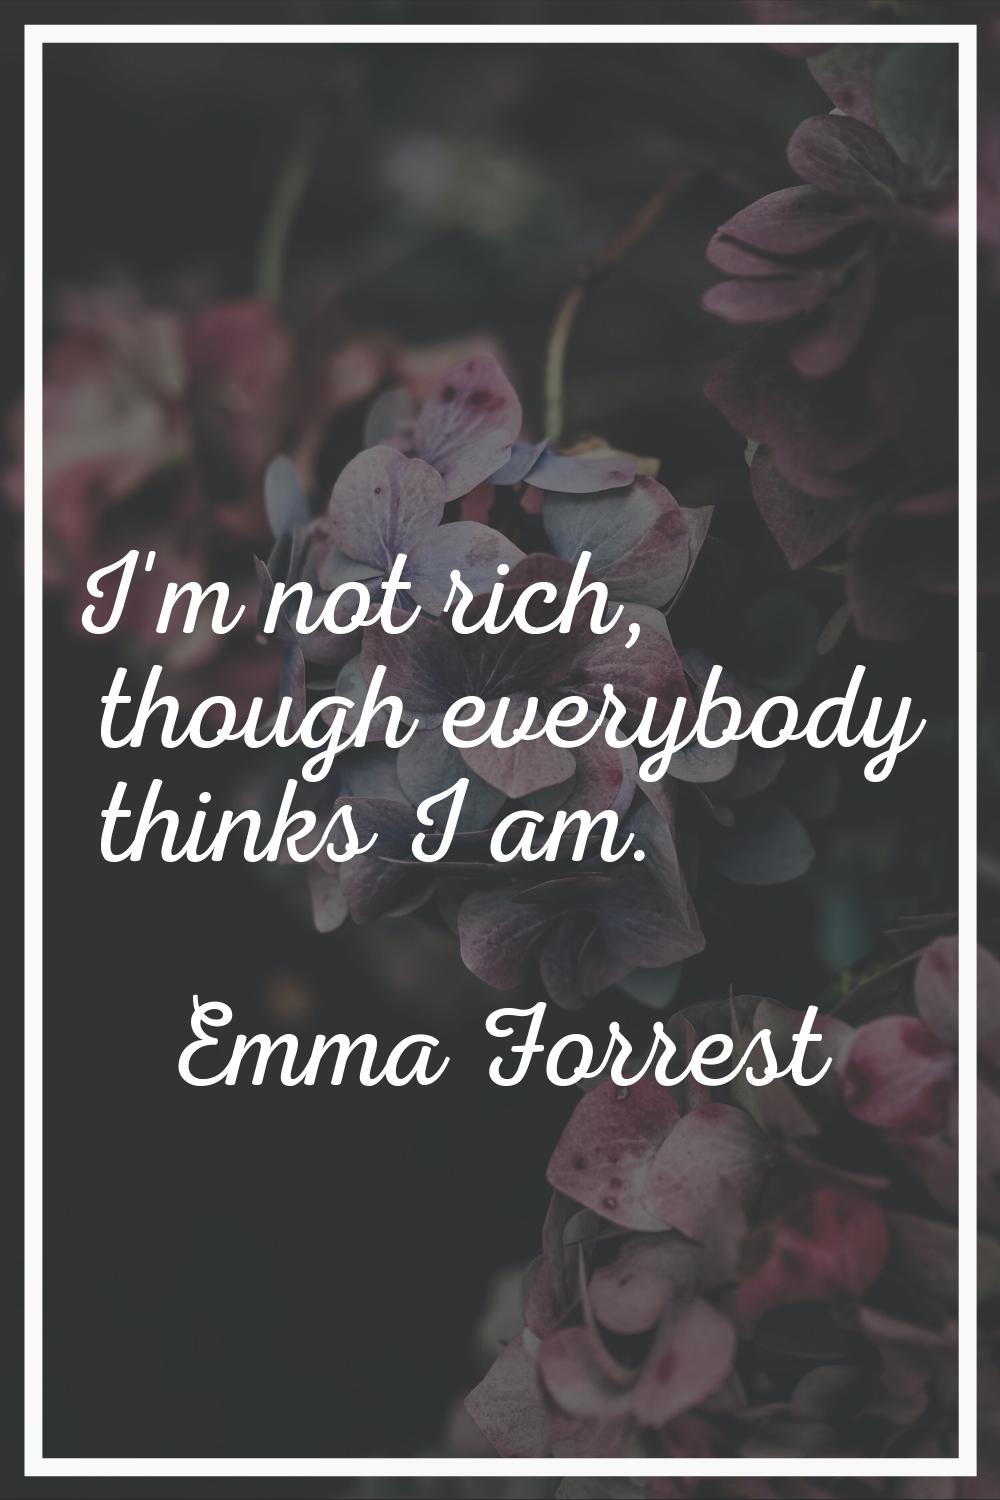 I'm not rich, though everybody thinks I am.